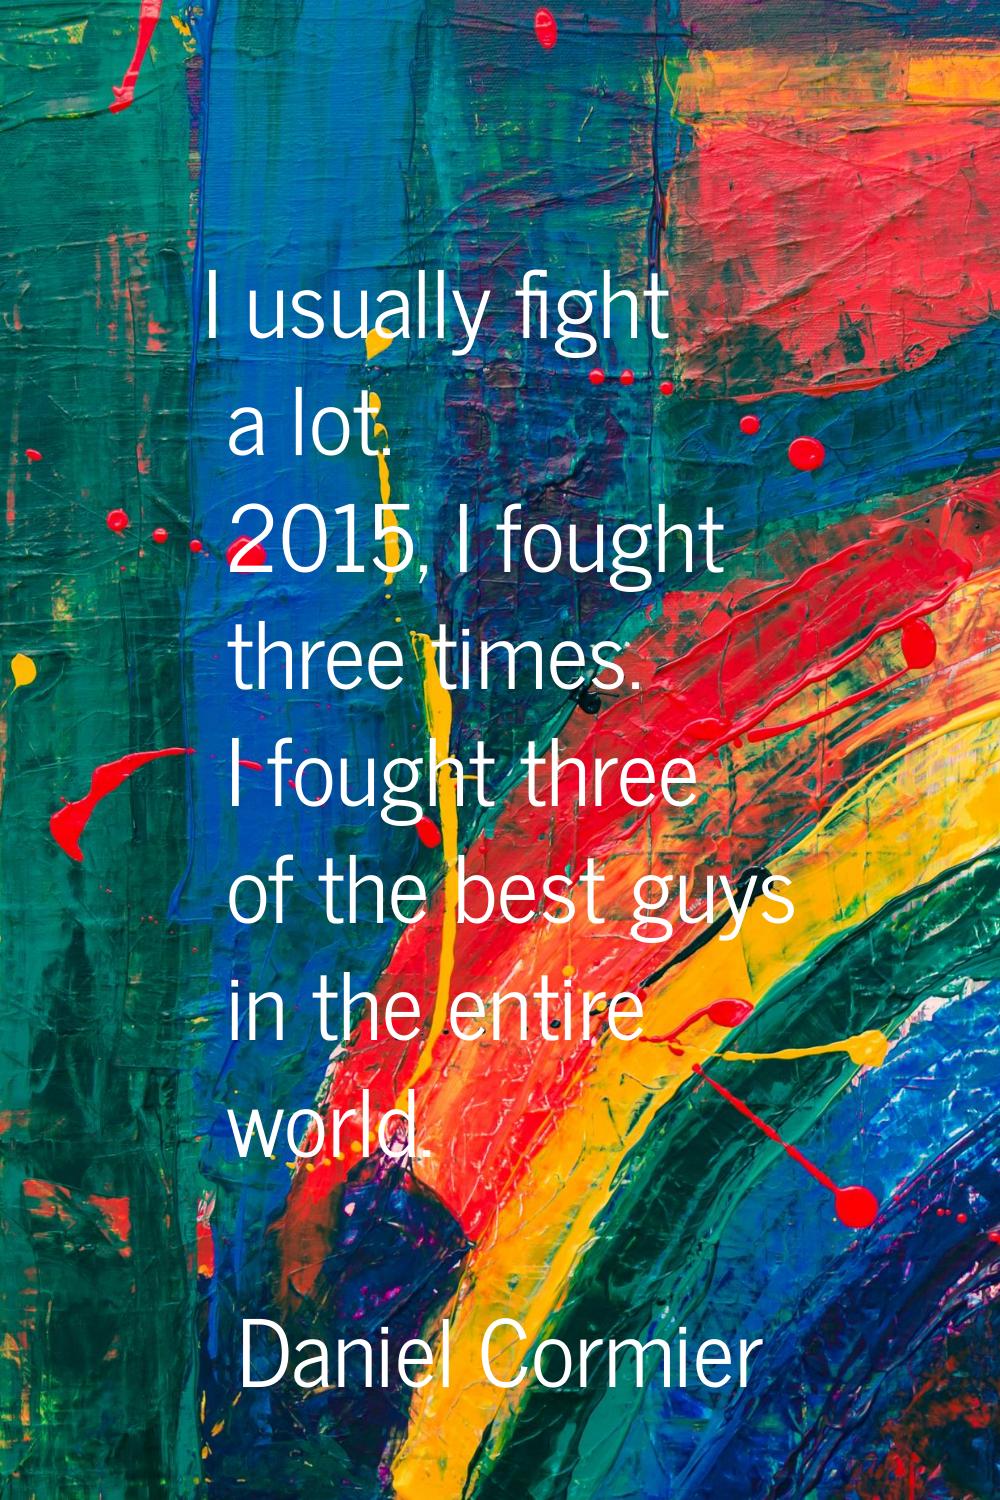 I usually fight a lot. 2015, I fought three times. I fought three of the best guys in the entire wo